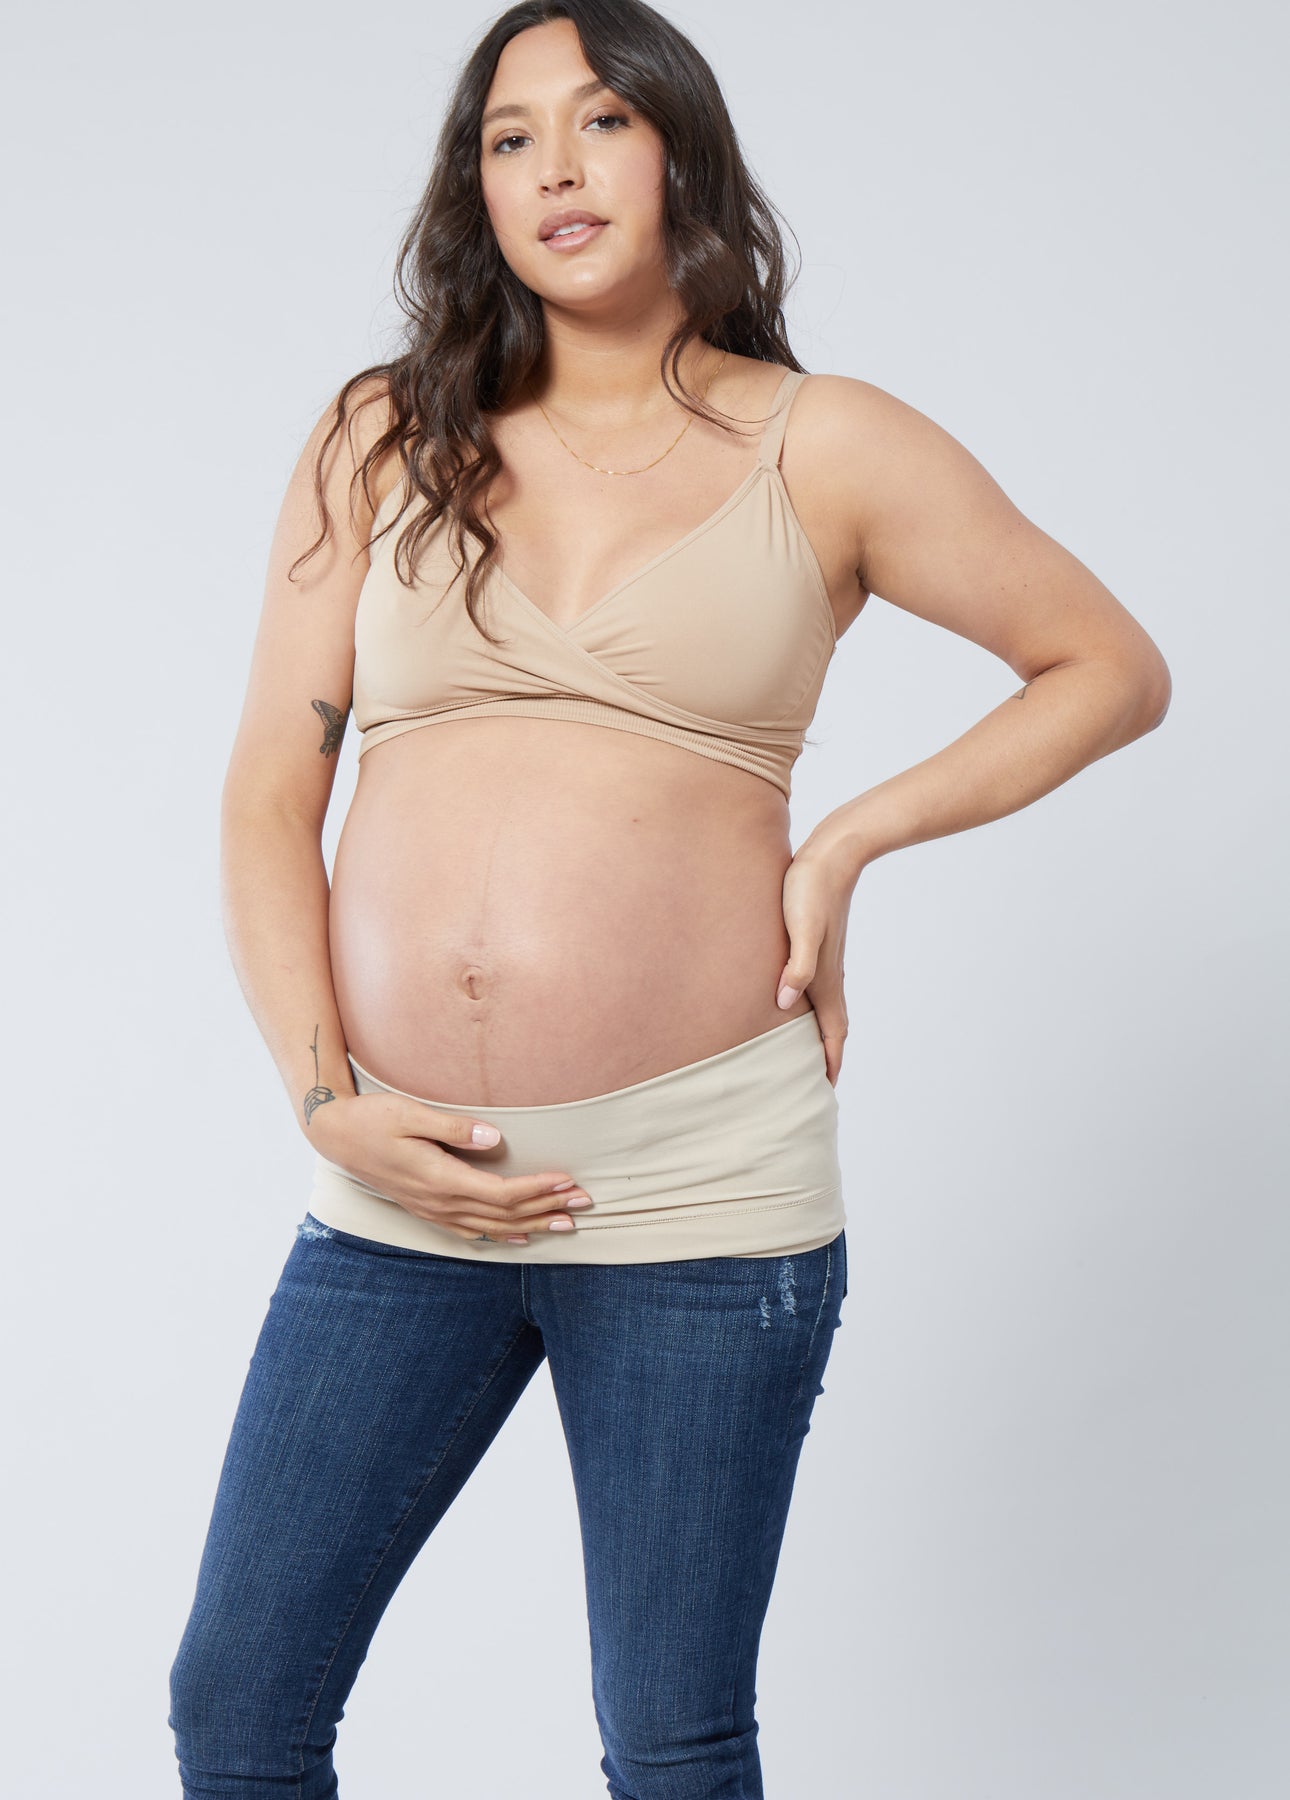 Top Benefits of Wearing a Maternity Bra – Belly Bandit